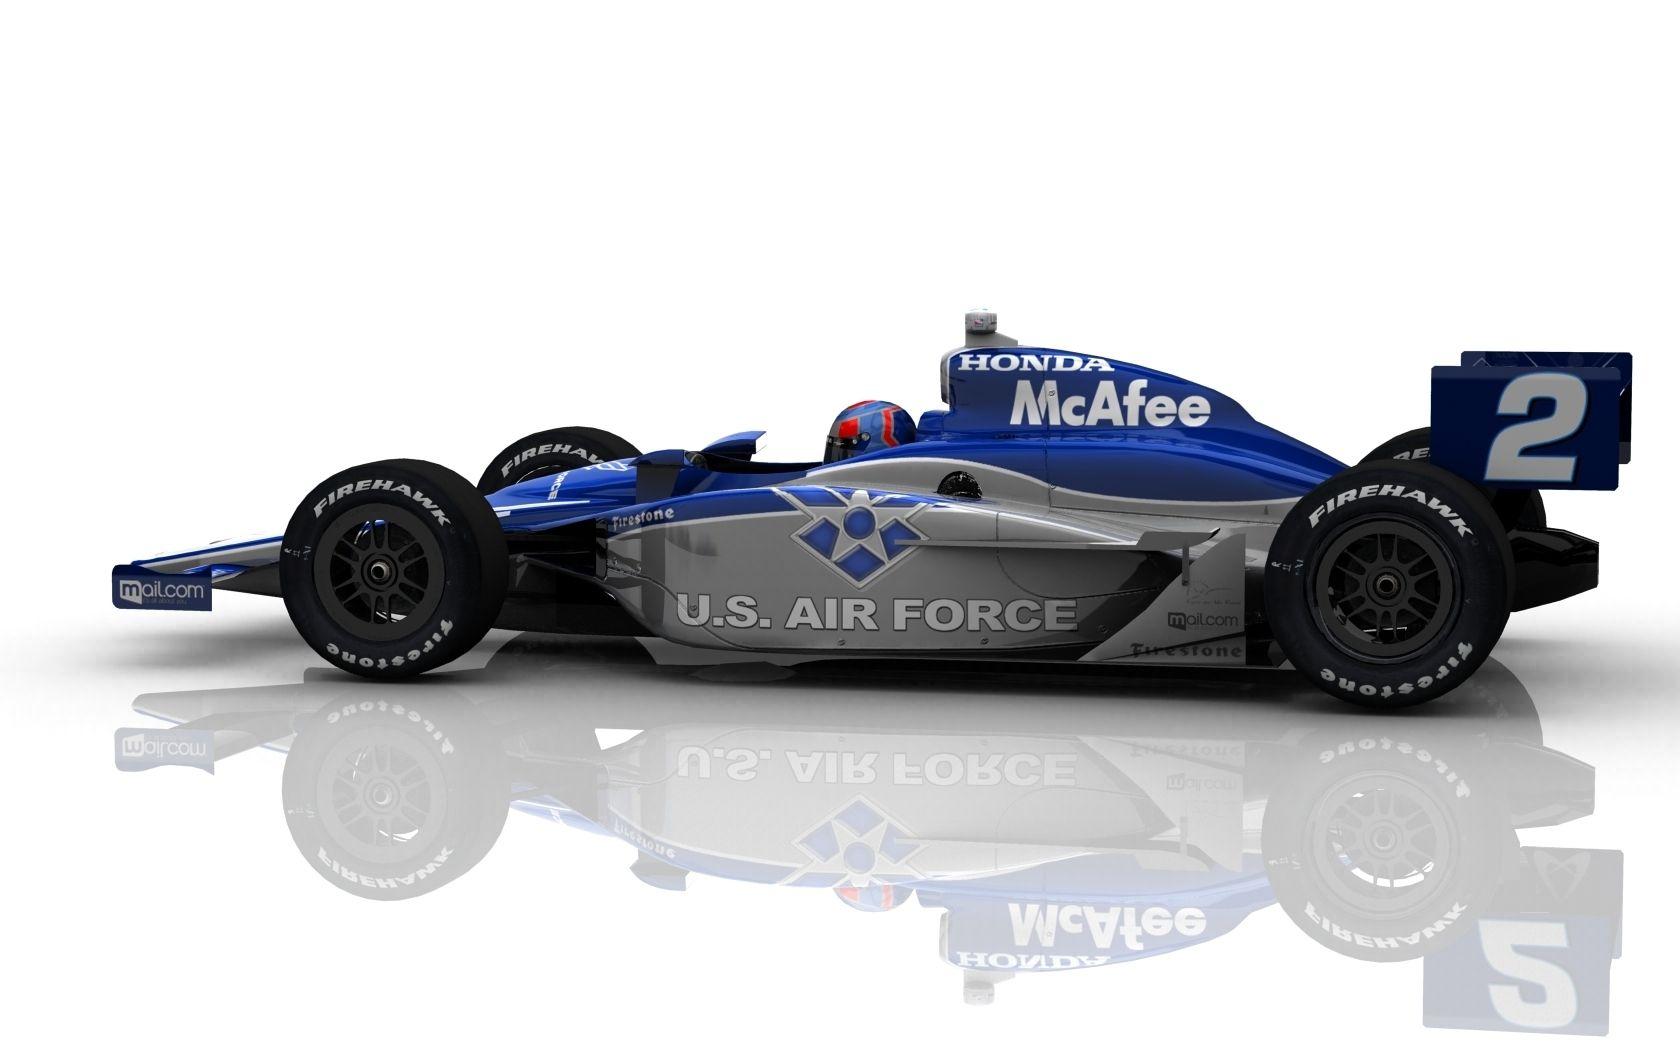 Air Force 'slows' speed with No. 2 Indy car. U.S. Air Force Live